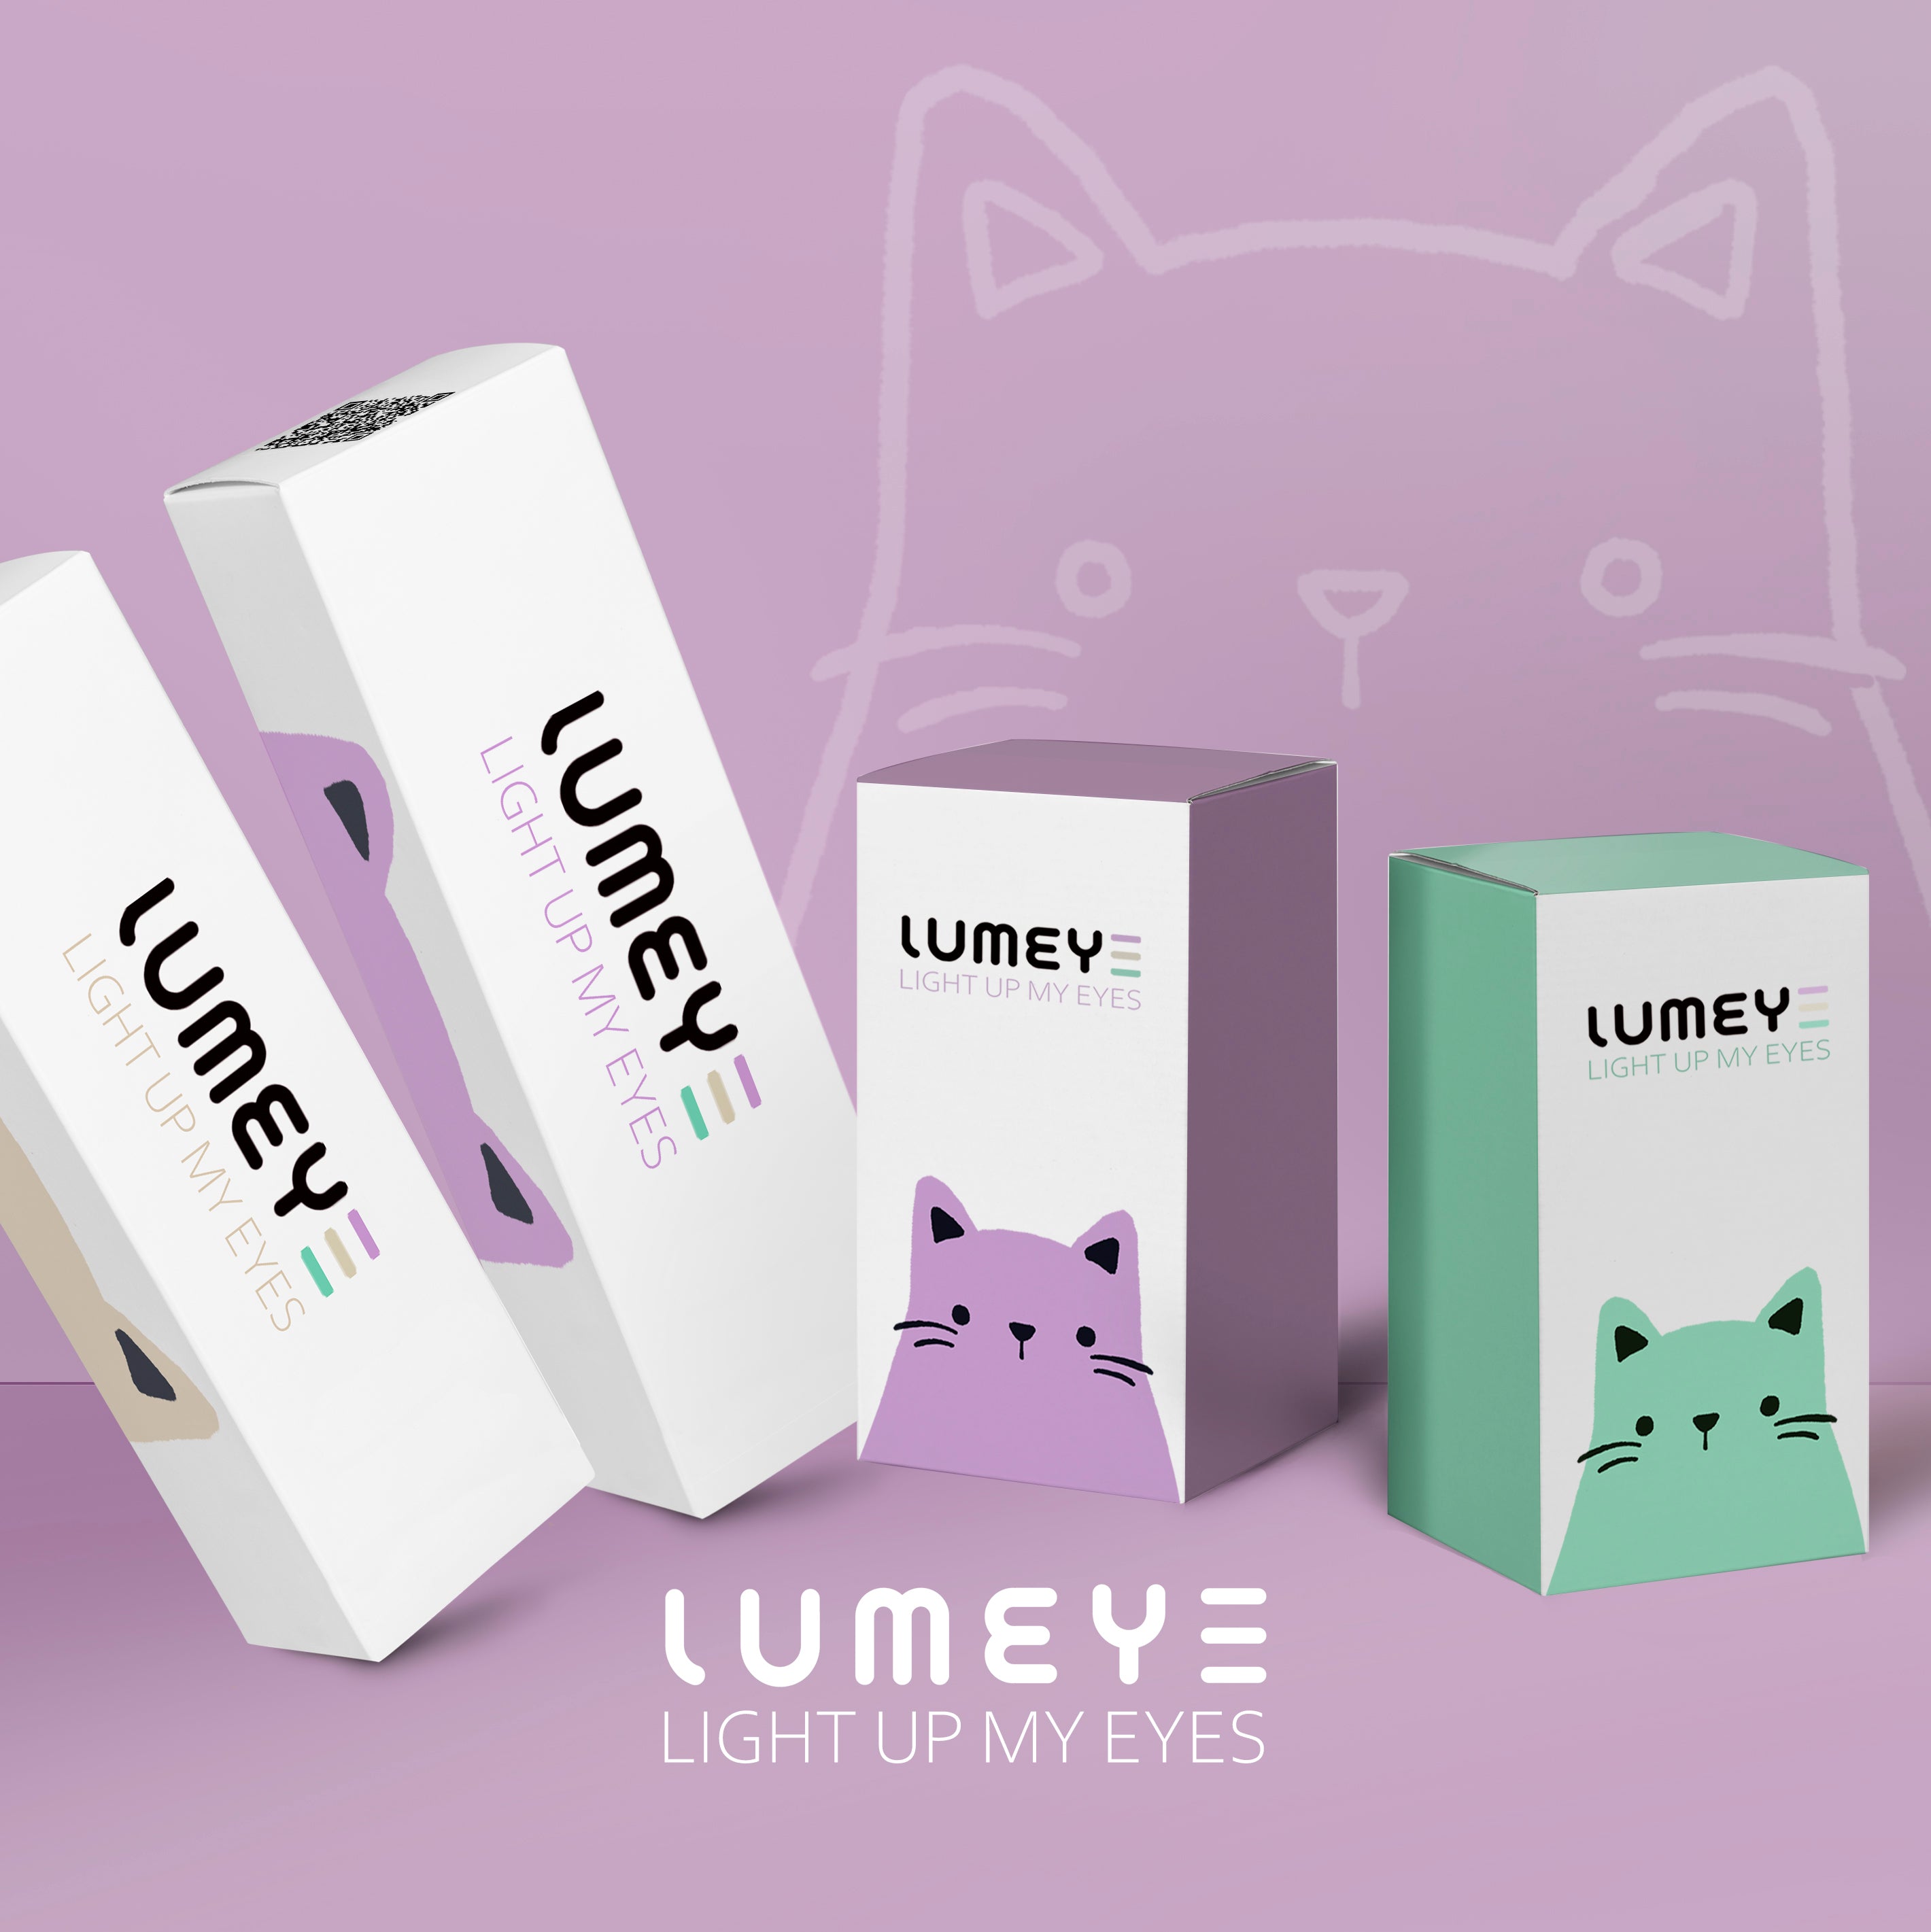 Best COLORED CONTACTS - LUMEYE Siam Purple Colored Contact Lenses - LUMEYE